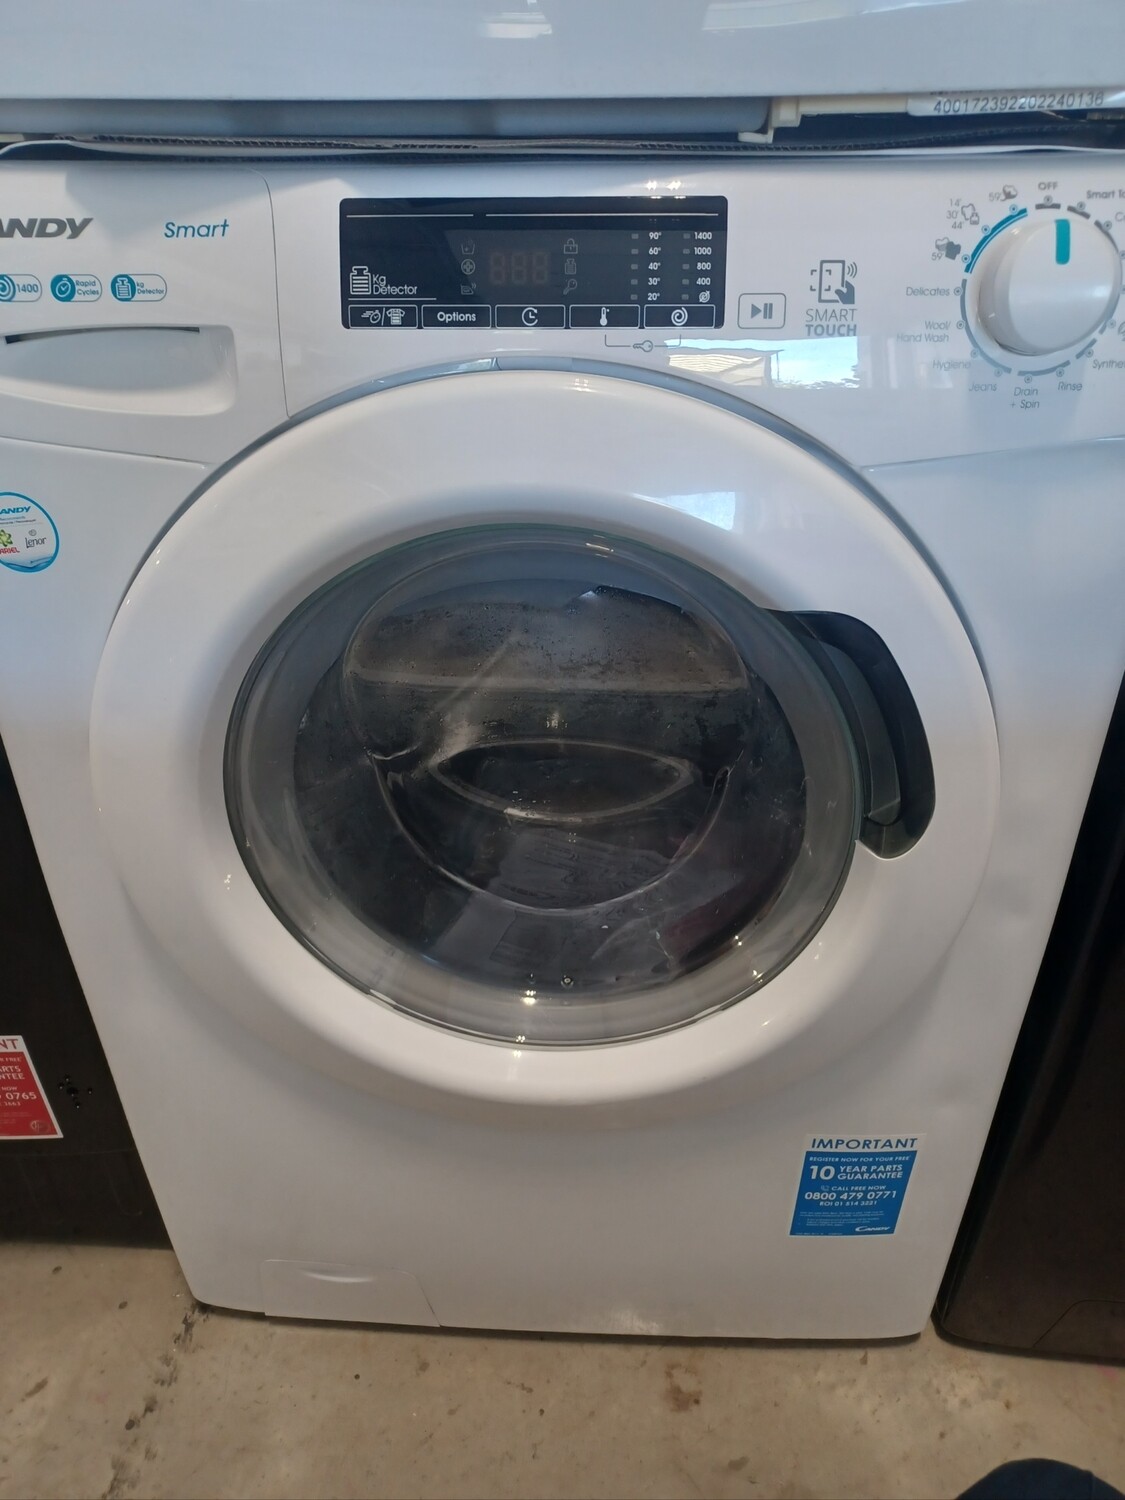 Candy CS149TE/1-80 Freestanding 9KG 1400 Spin Washing Machine New Graded + 12 Month Guarantee Note on pictures dents on front